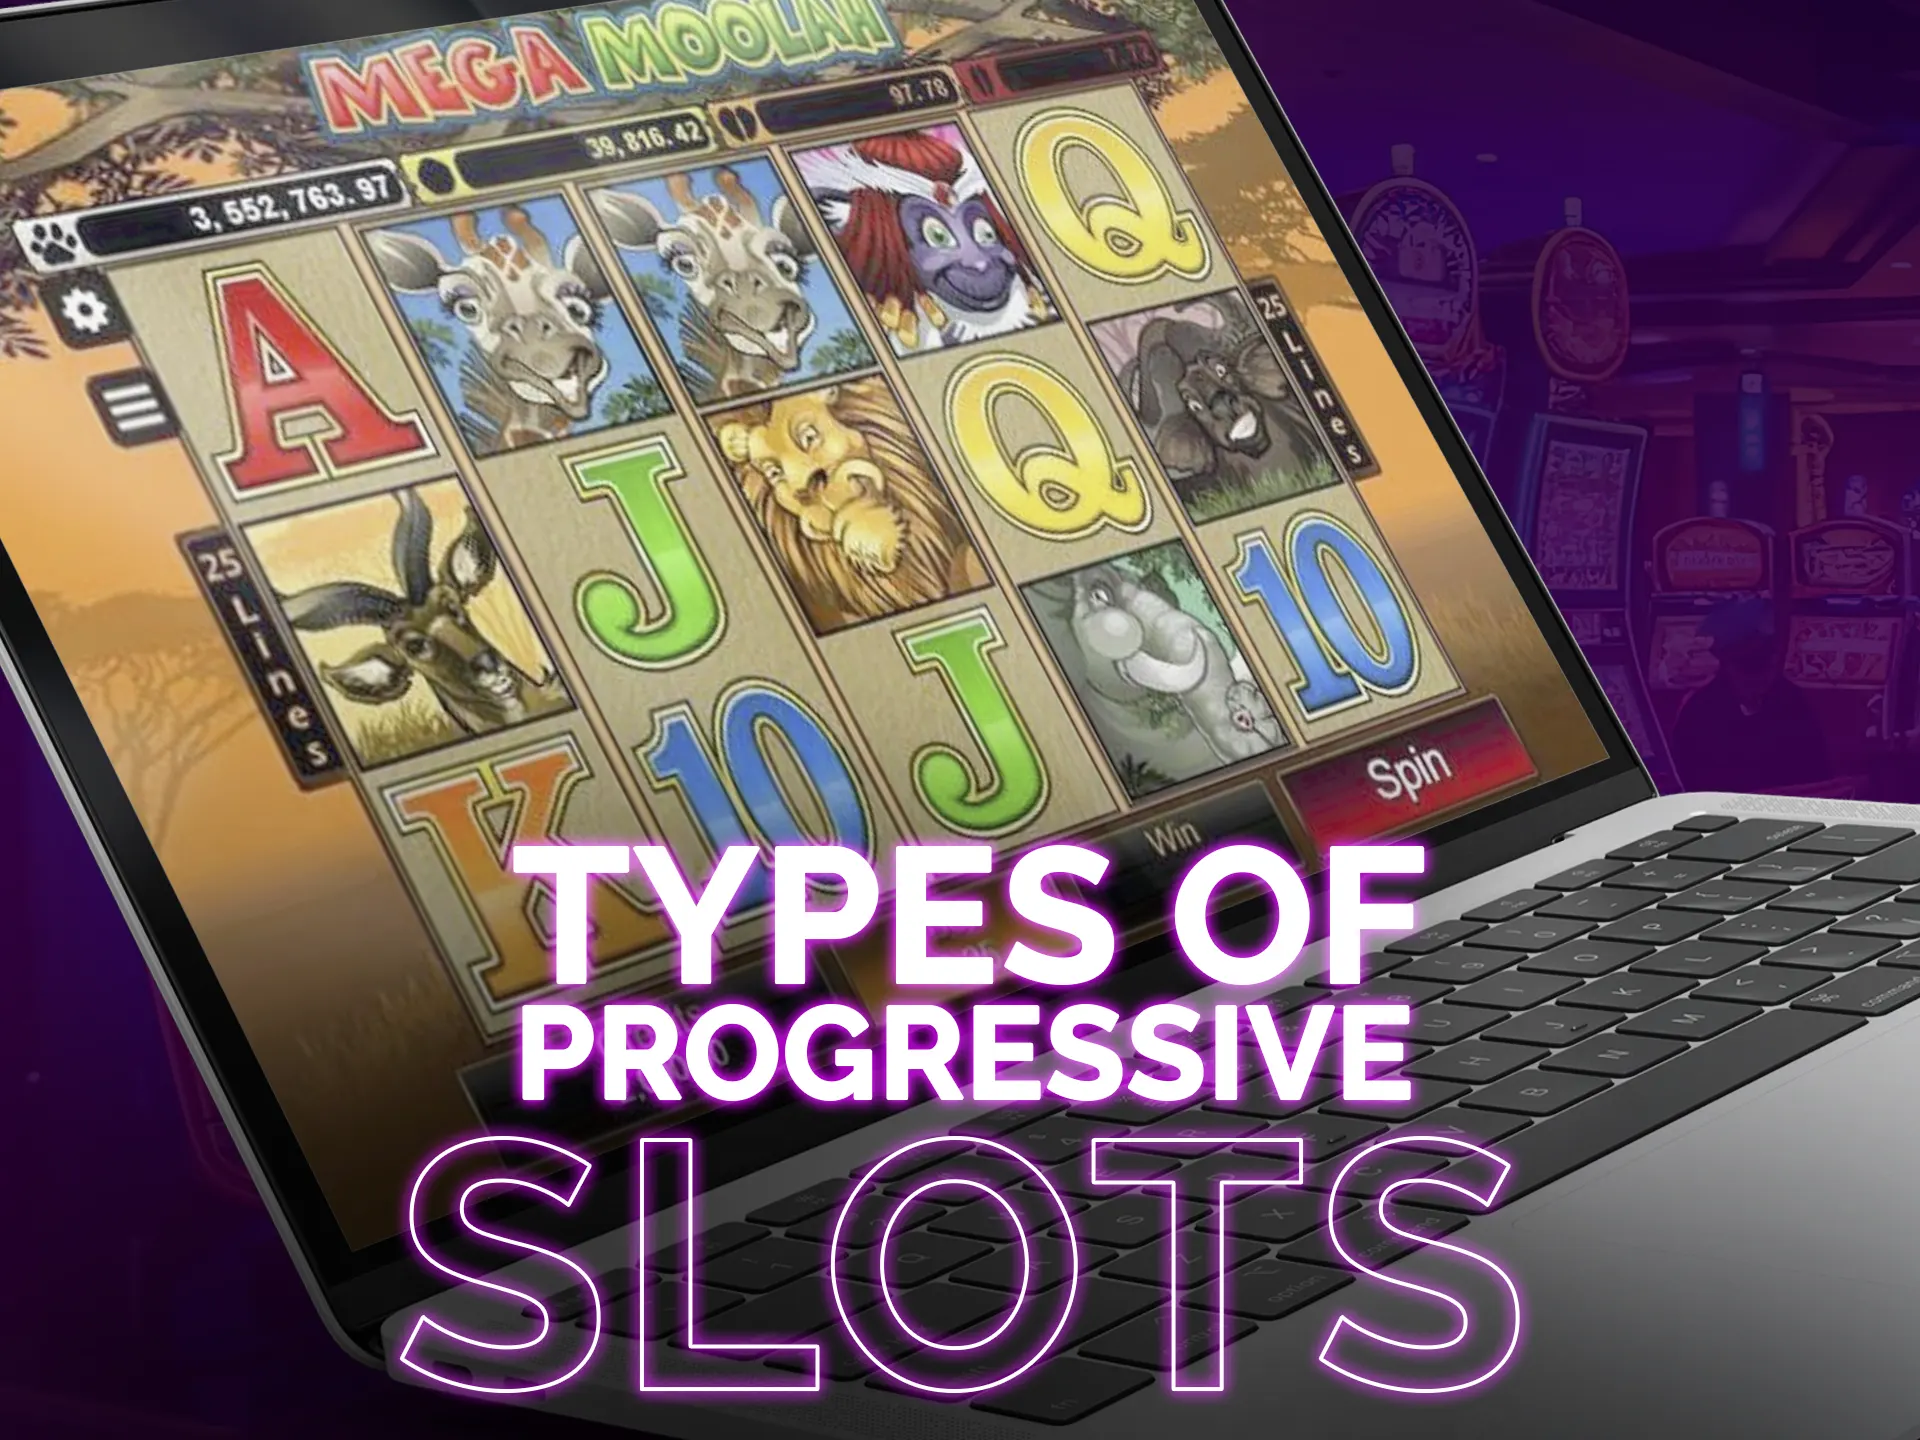 You won't get tired of playing progressive slots.